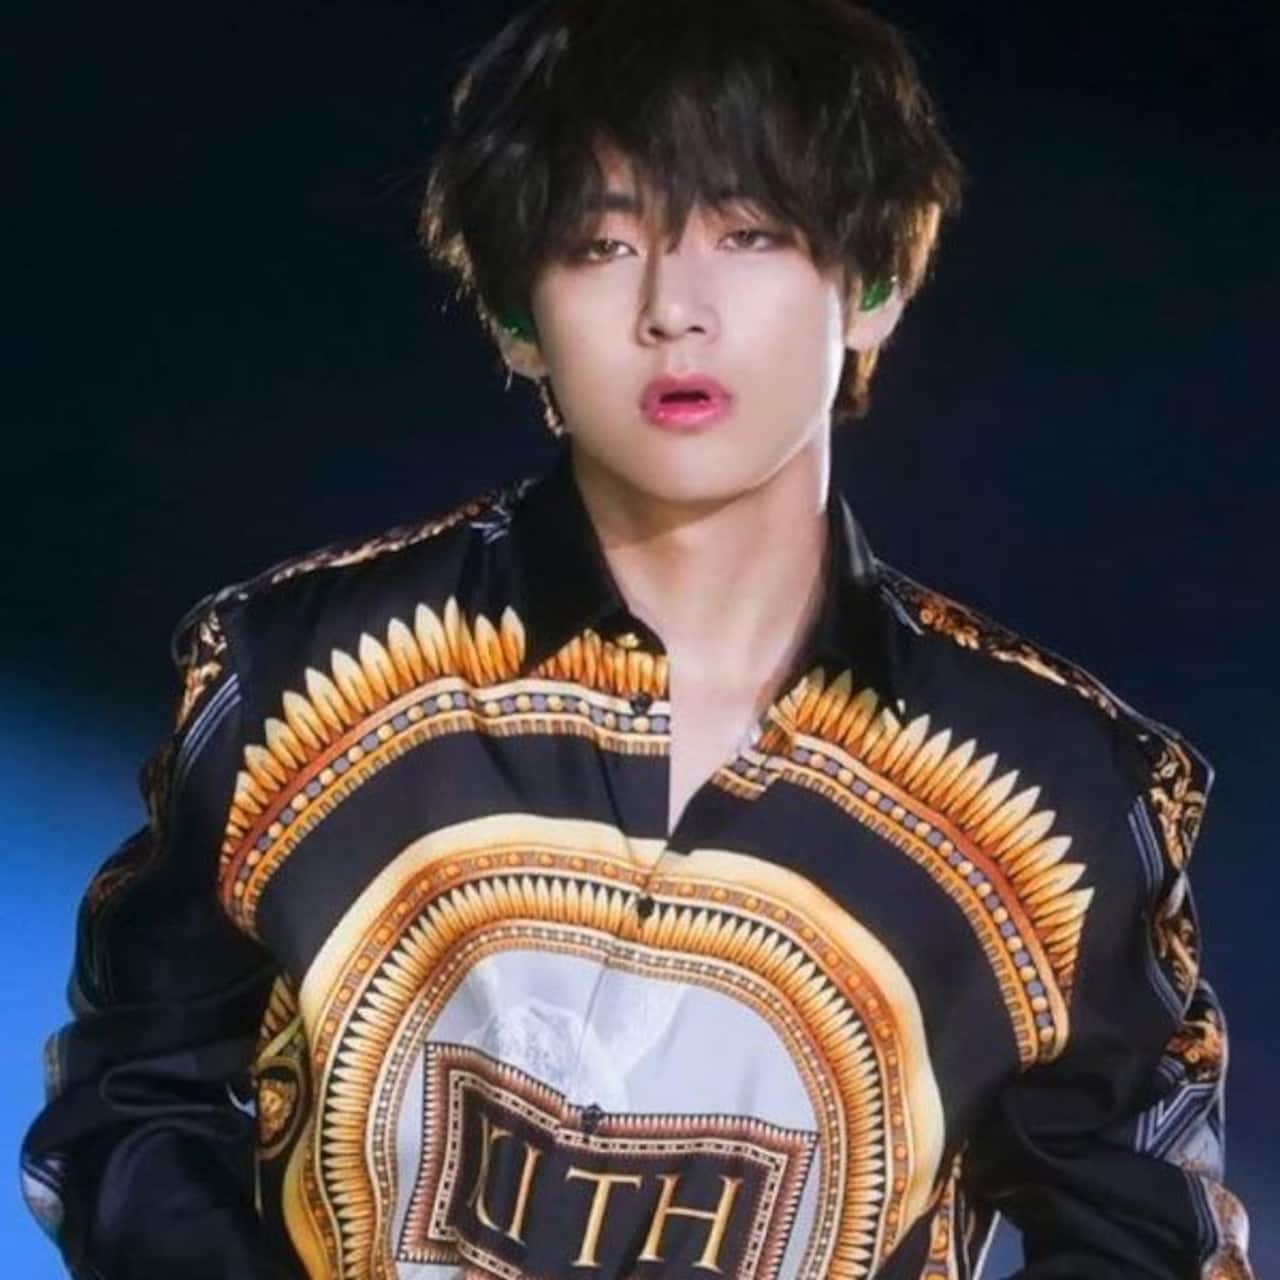 BTS' V aka Kim Taehyung's HOT pictures will leave female ARMY drooling